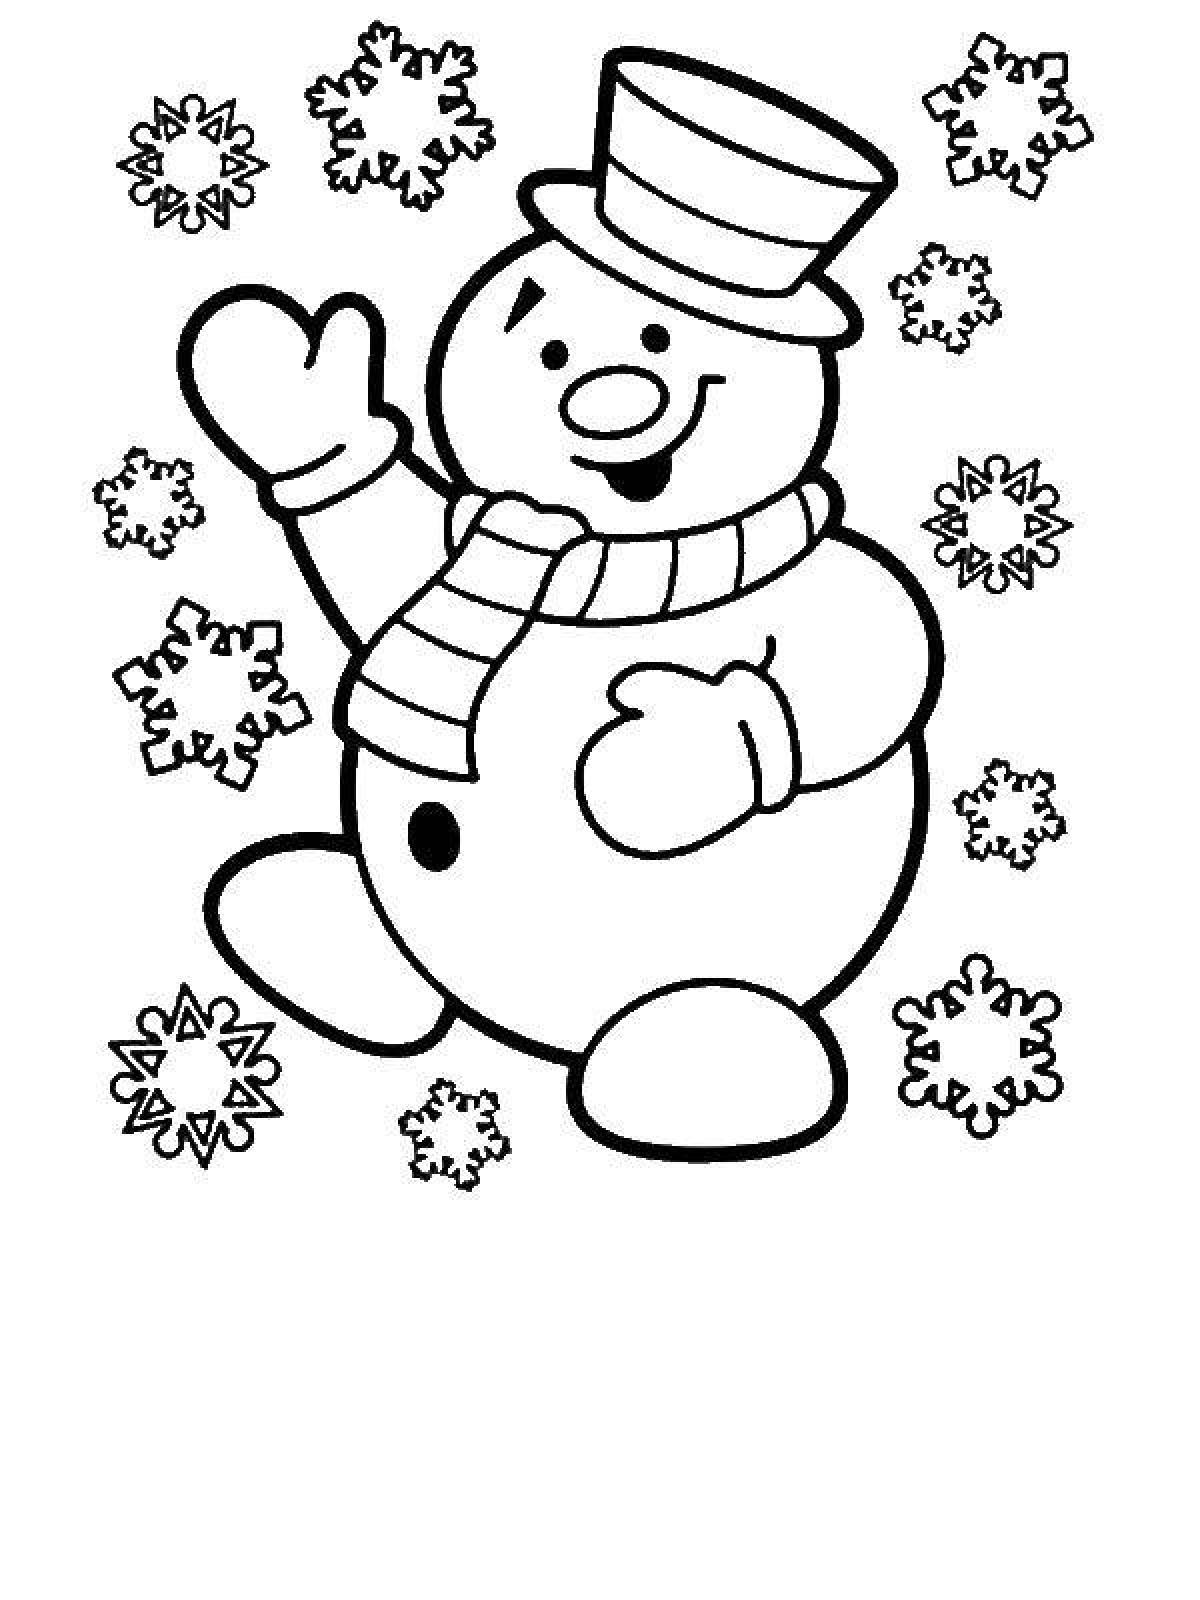 Funny snowman antistress coloring book